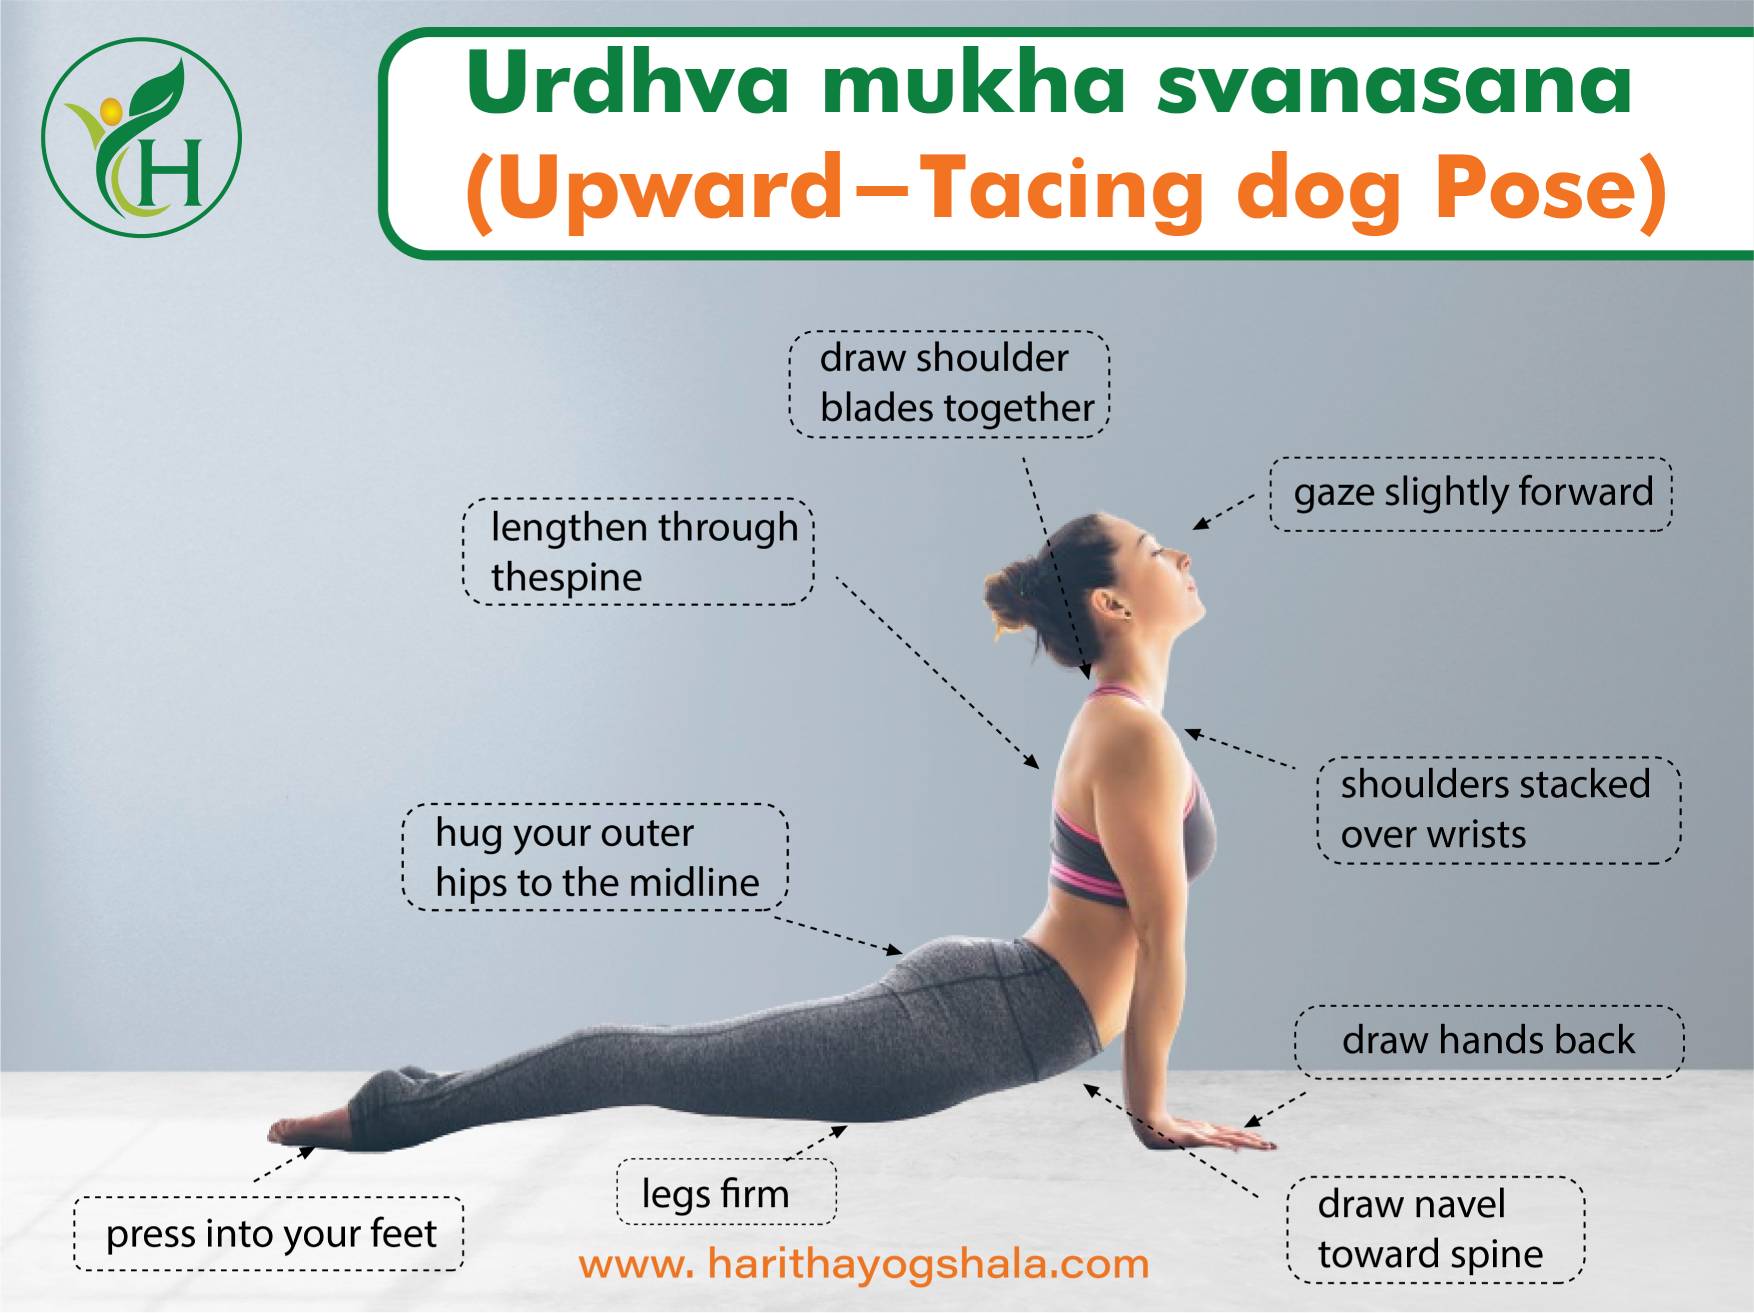 A woman gracefully performing Urdhva Mukha Shvanasana, the Upward-Facing Dog pose. She arches her back, lifting her chest and extending her arms while keeping her legs and feet grounded. This pose promotes strength, flexibility, and energizing breath, enhancing overall well-being in a yoga practice